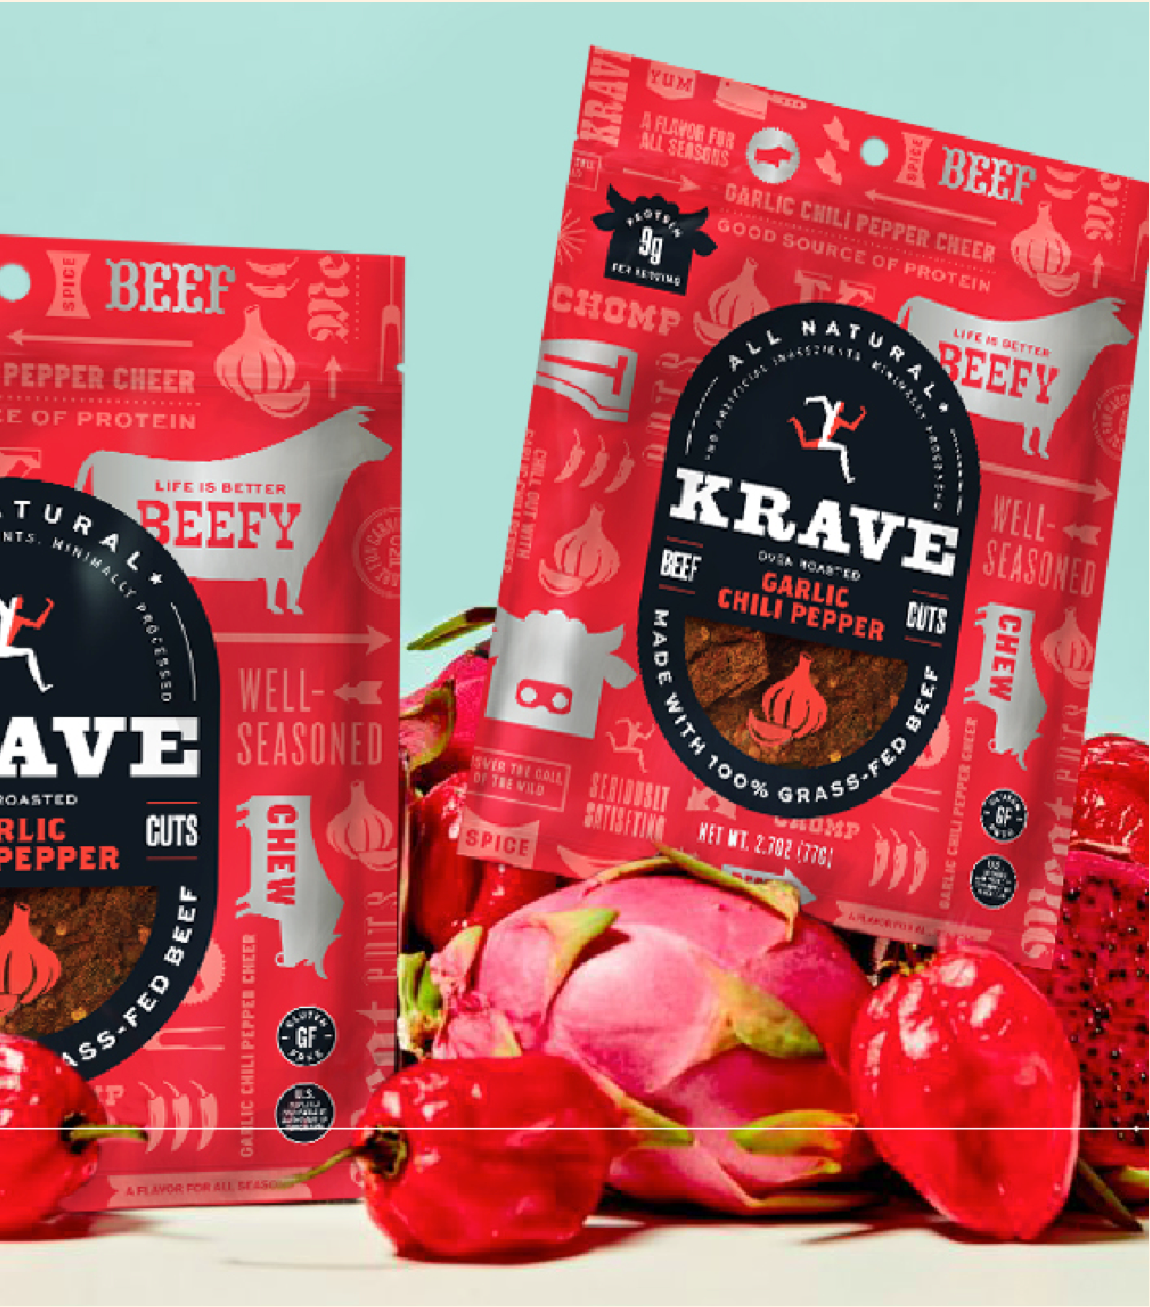 Krave launches in all west coast whole foods